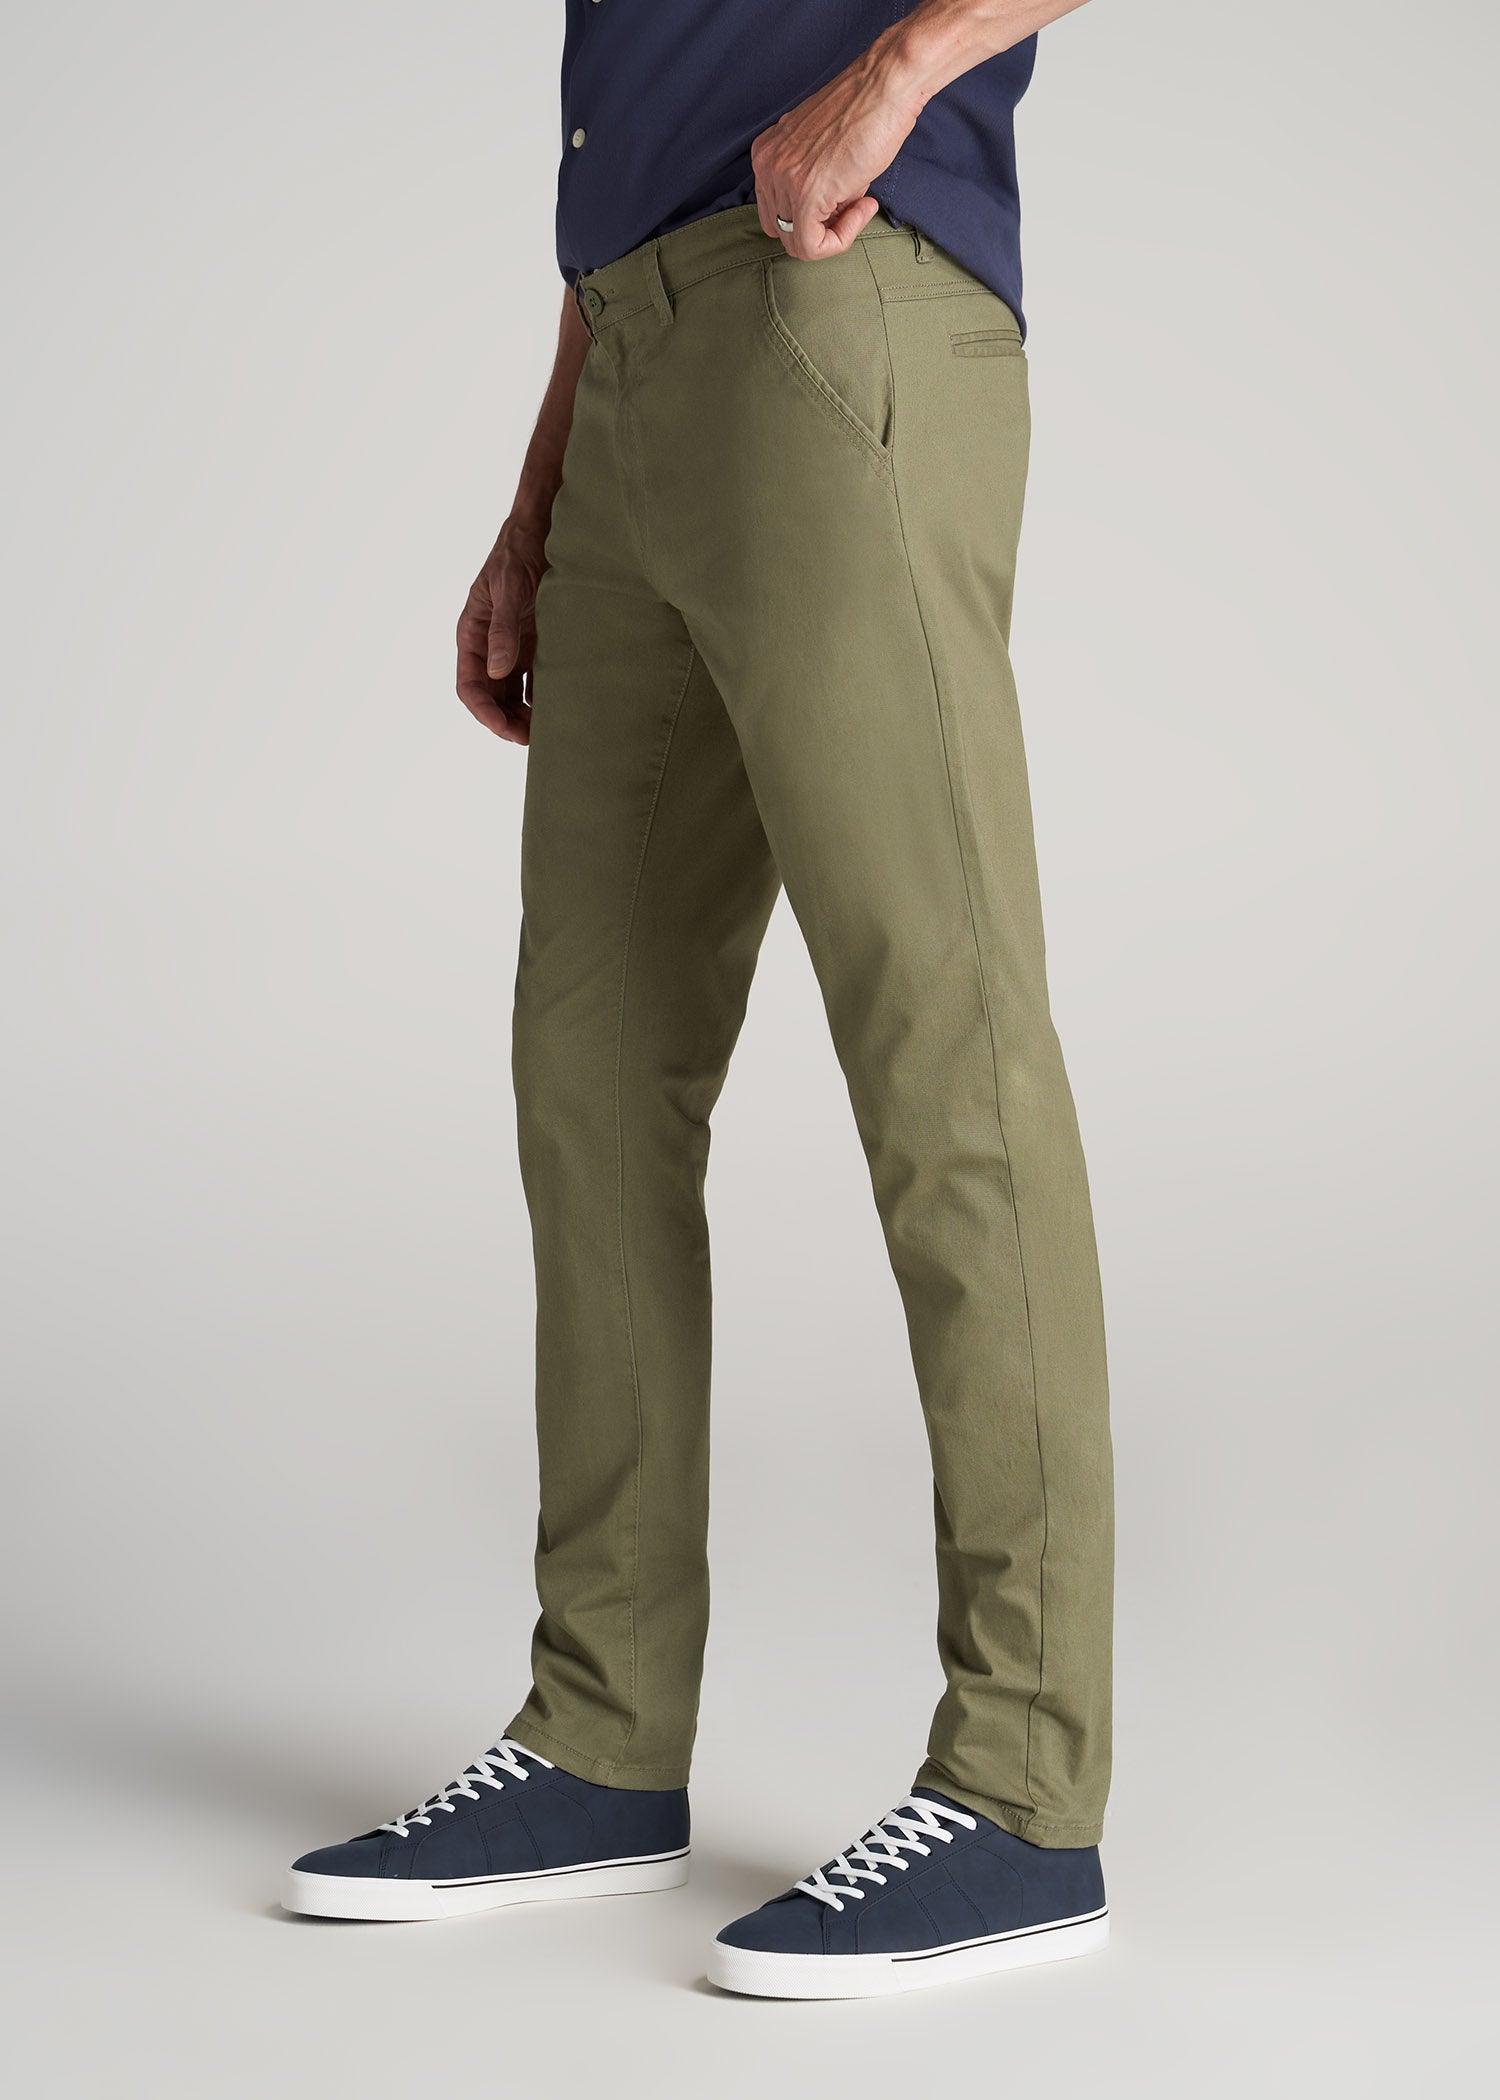 TAPERED-FIT Ripstop Pants for Tall Men in Oregano